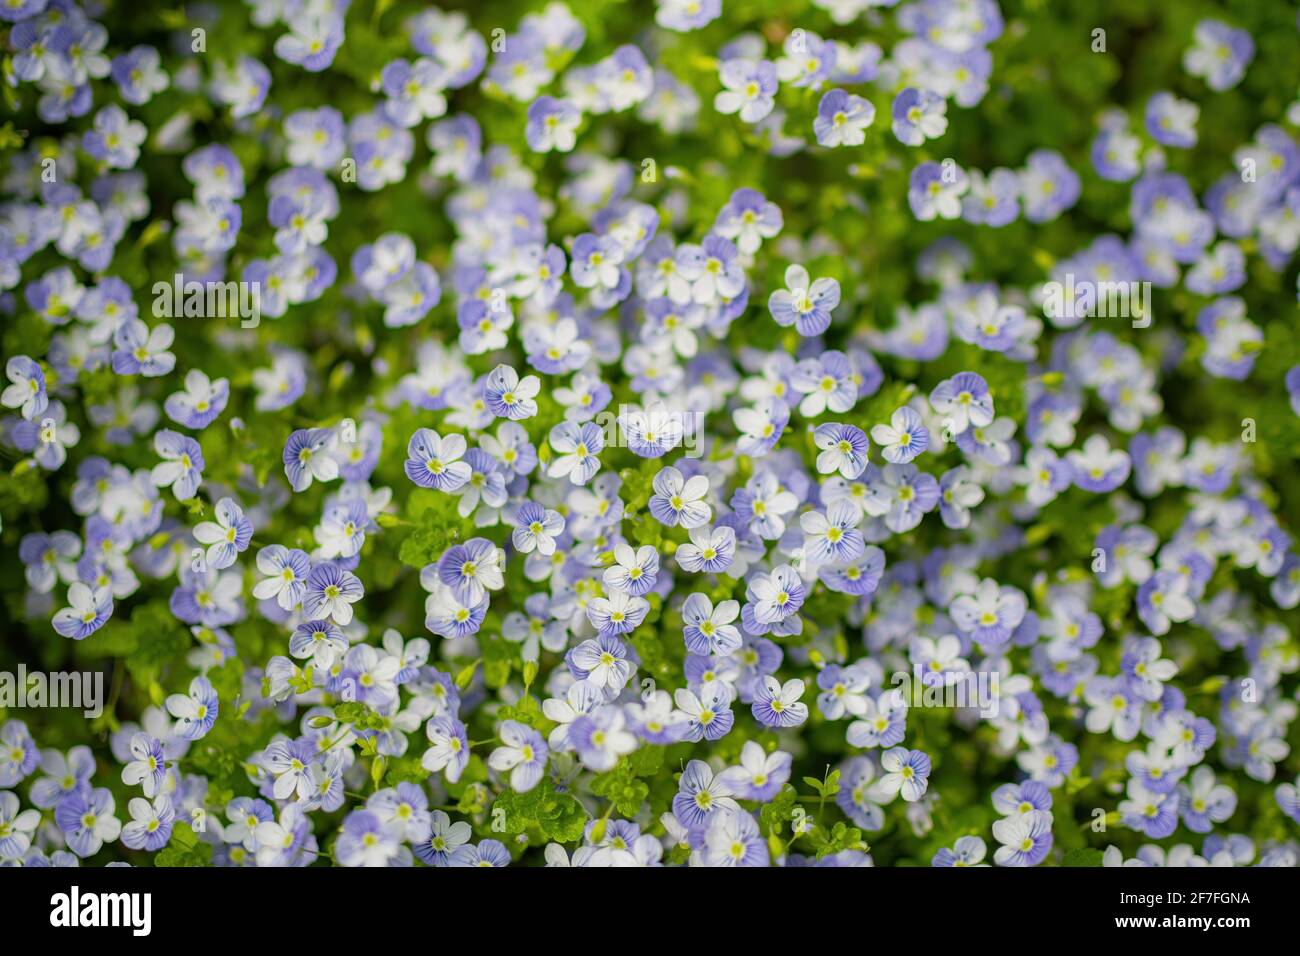 Blue flowers Veronica speedwell closeup in meadow Stock Photo